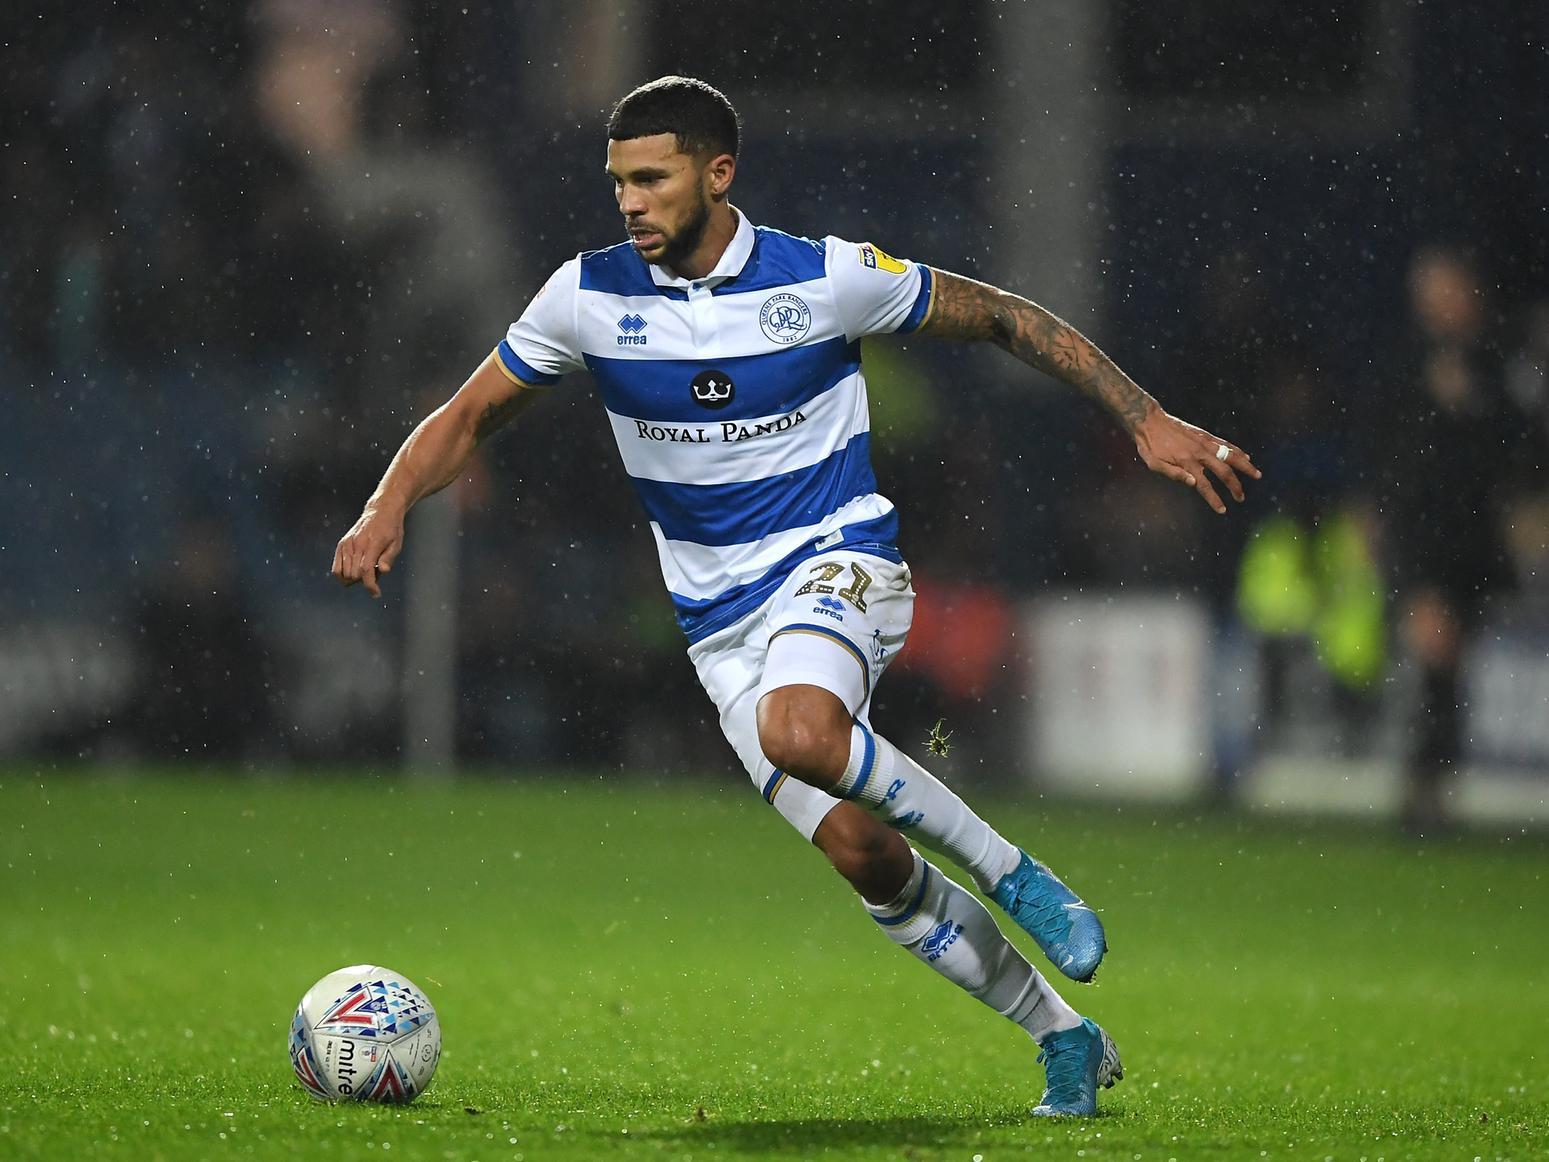 New Bristol City man Nahki Wells has won the Sky Bet Championship player of the month award based on his performances for former club QPR. (Various)